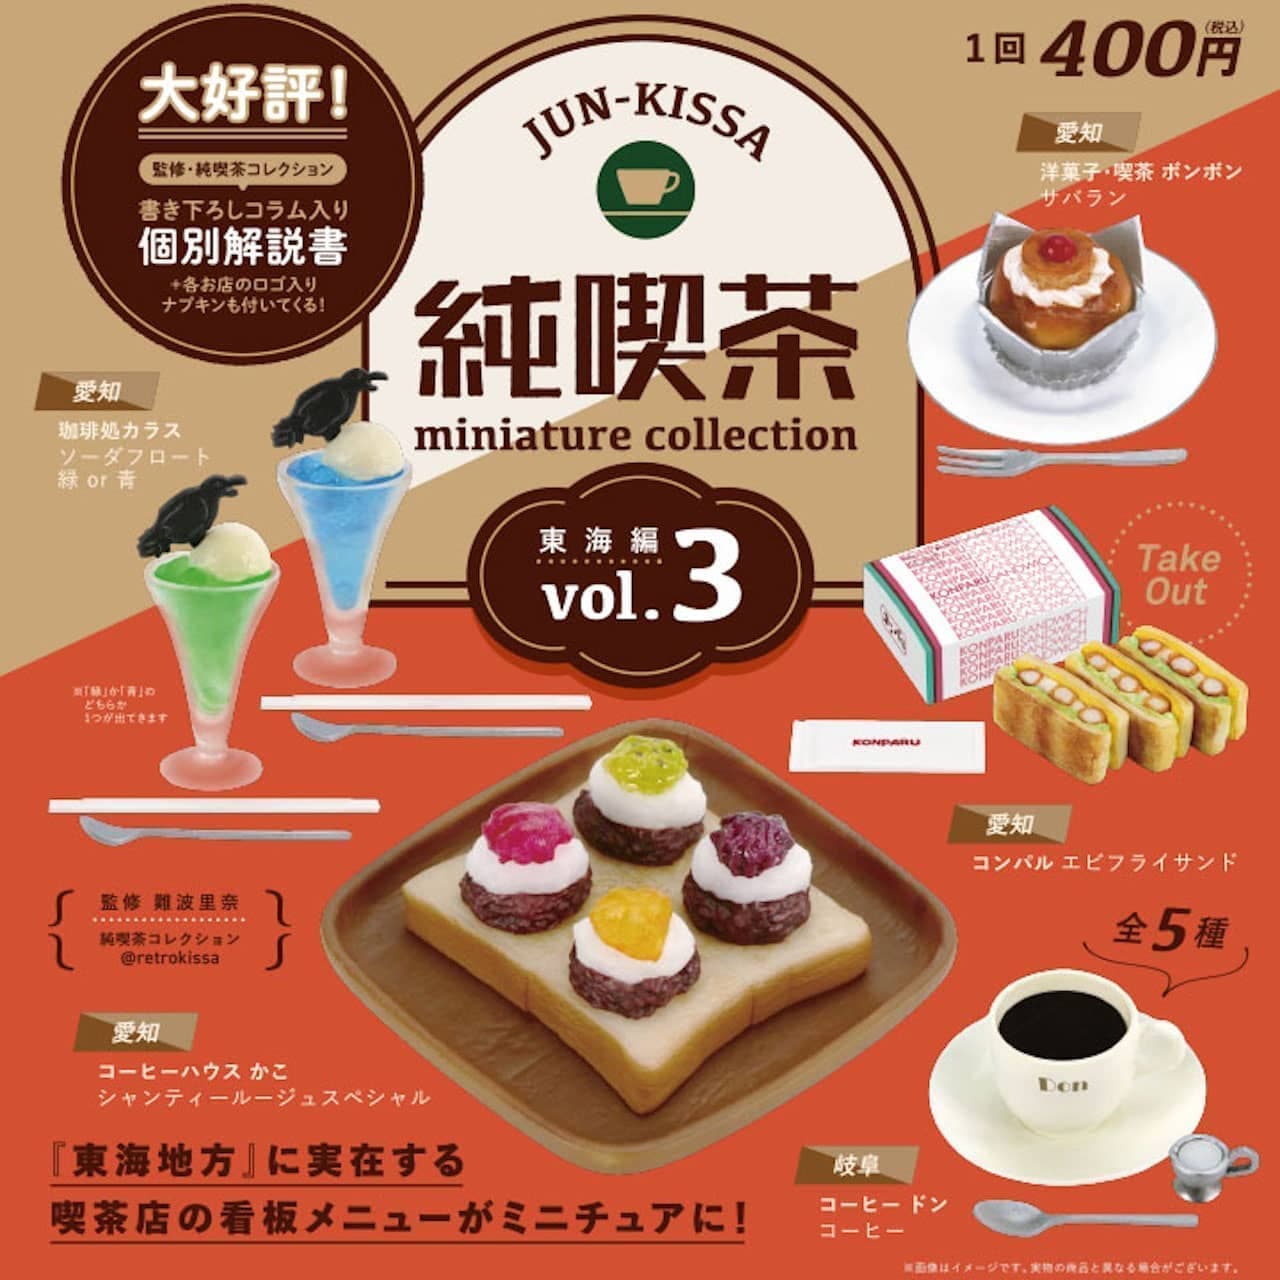 Junko Cafe Miniature Collection Vol. 3" from Ken Elephant.